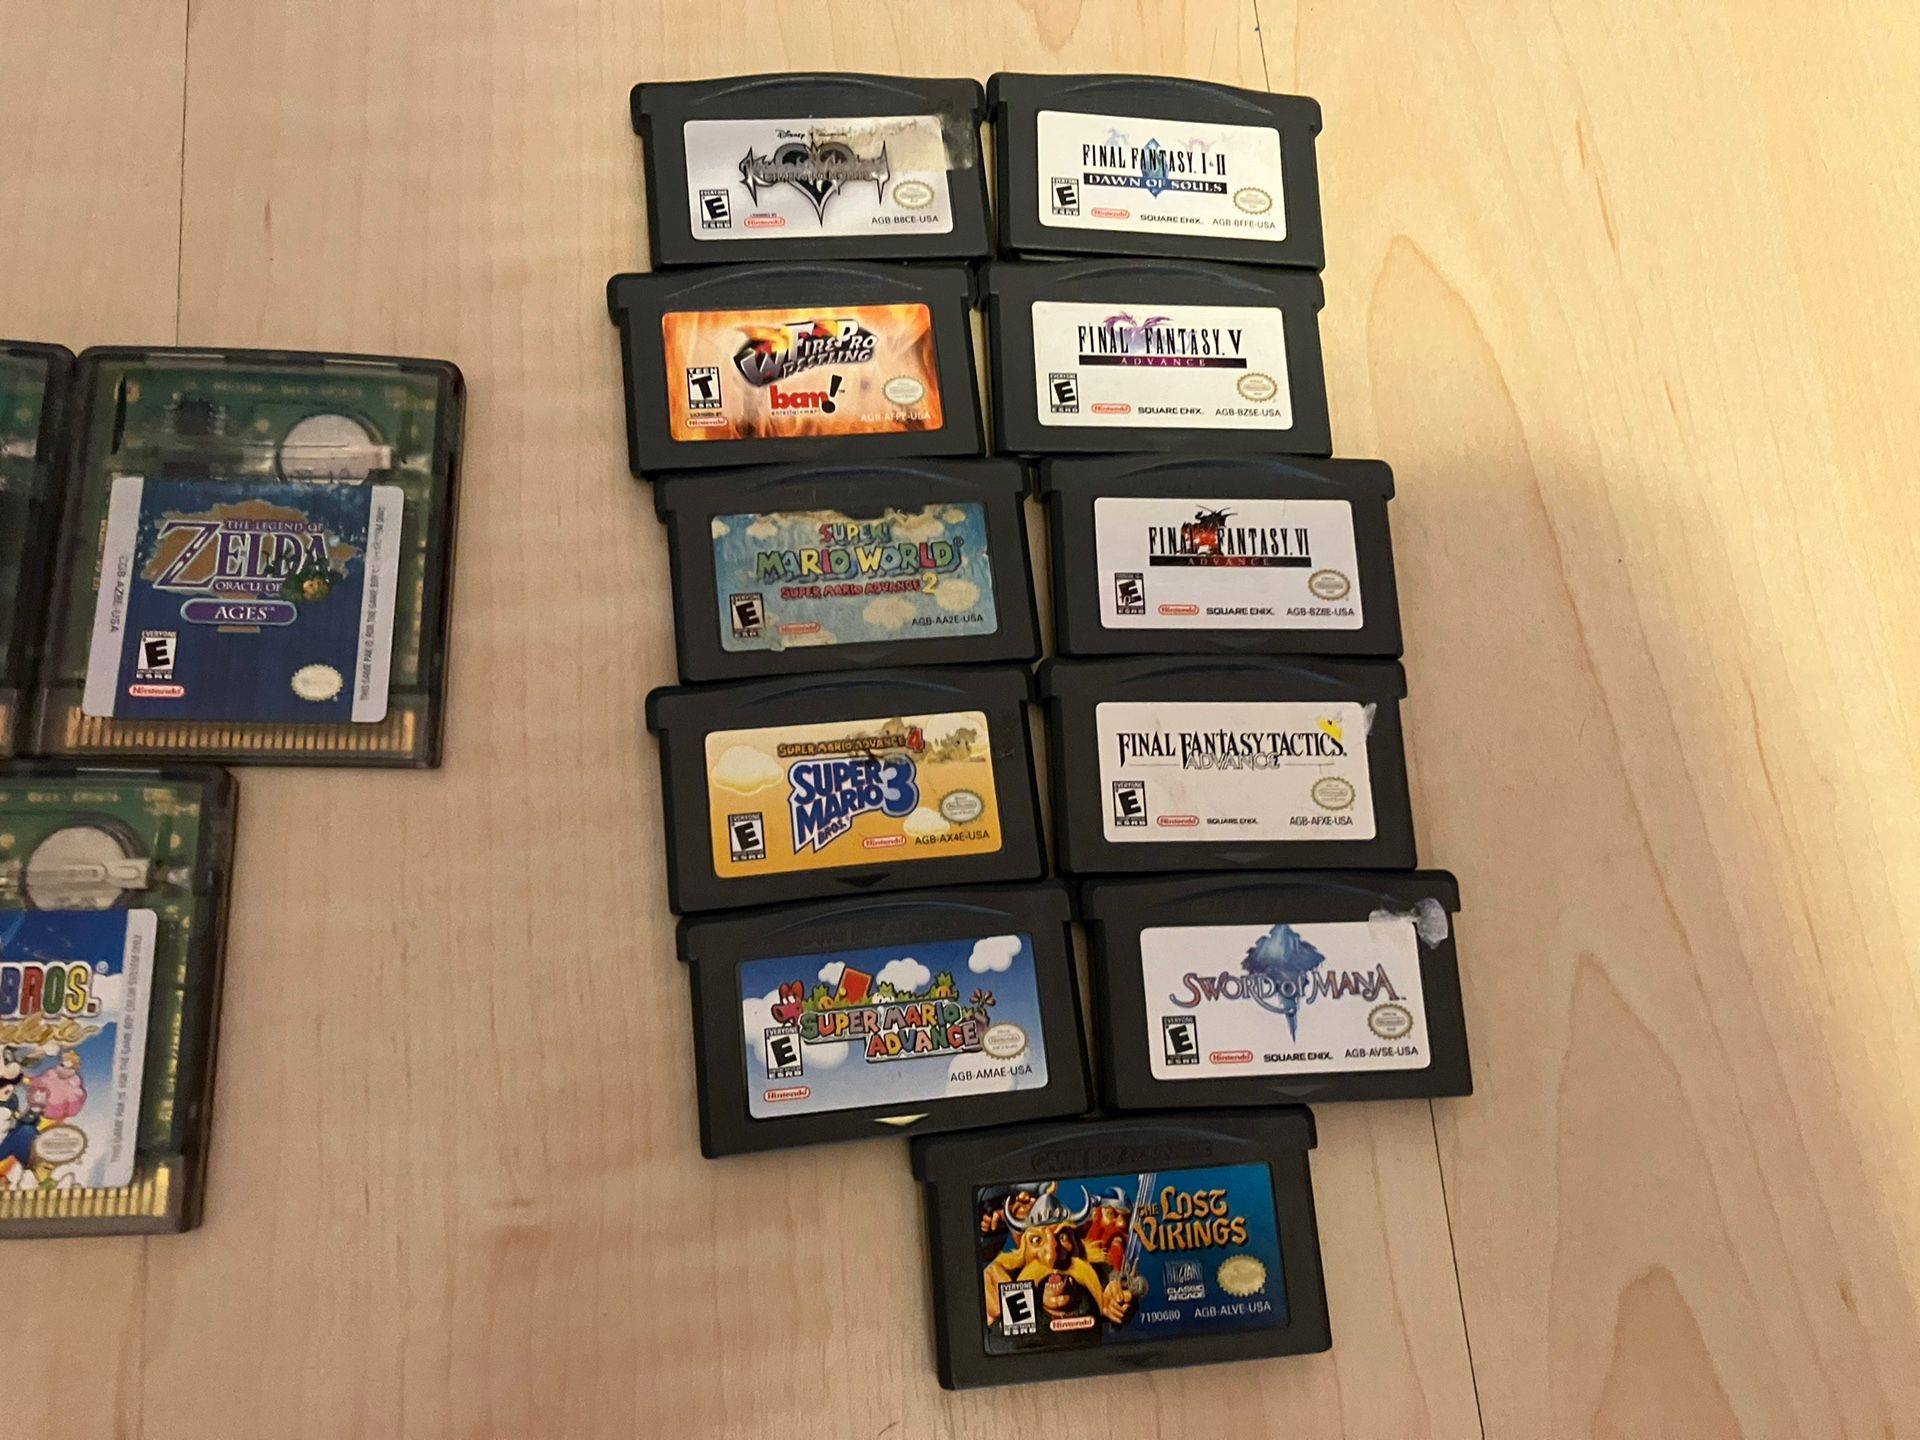 Gameboy Advance SP platinum & GBA Games (only sold together)